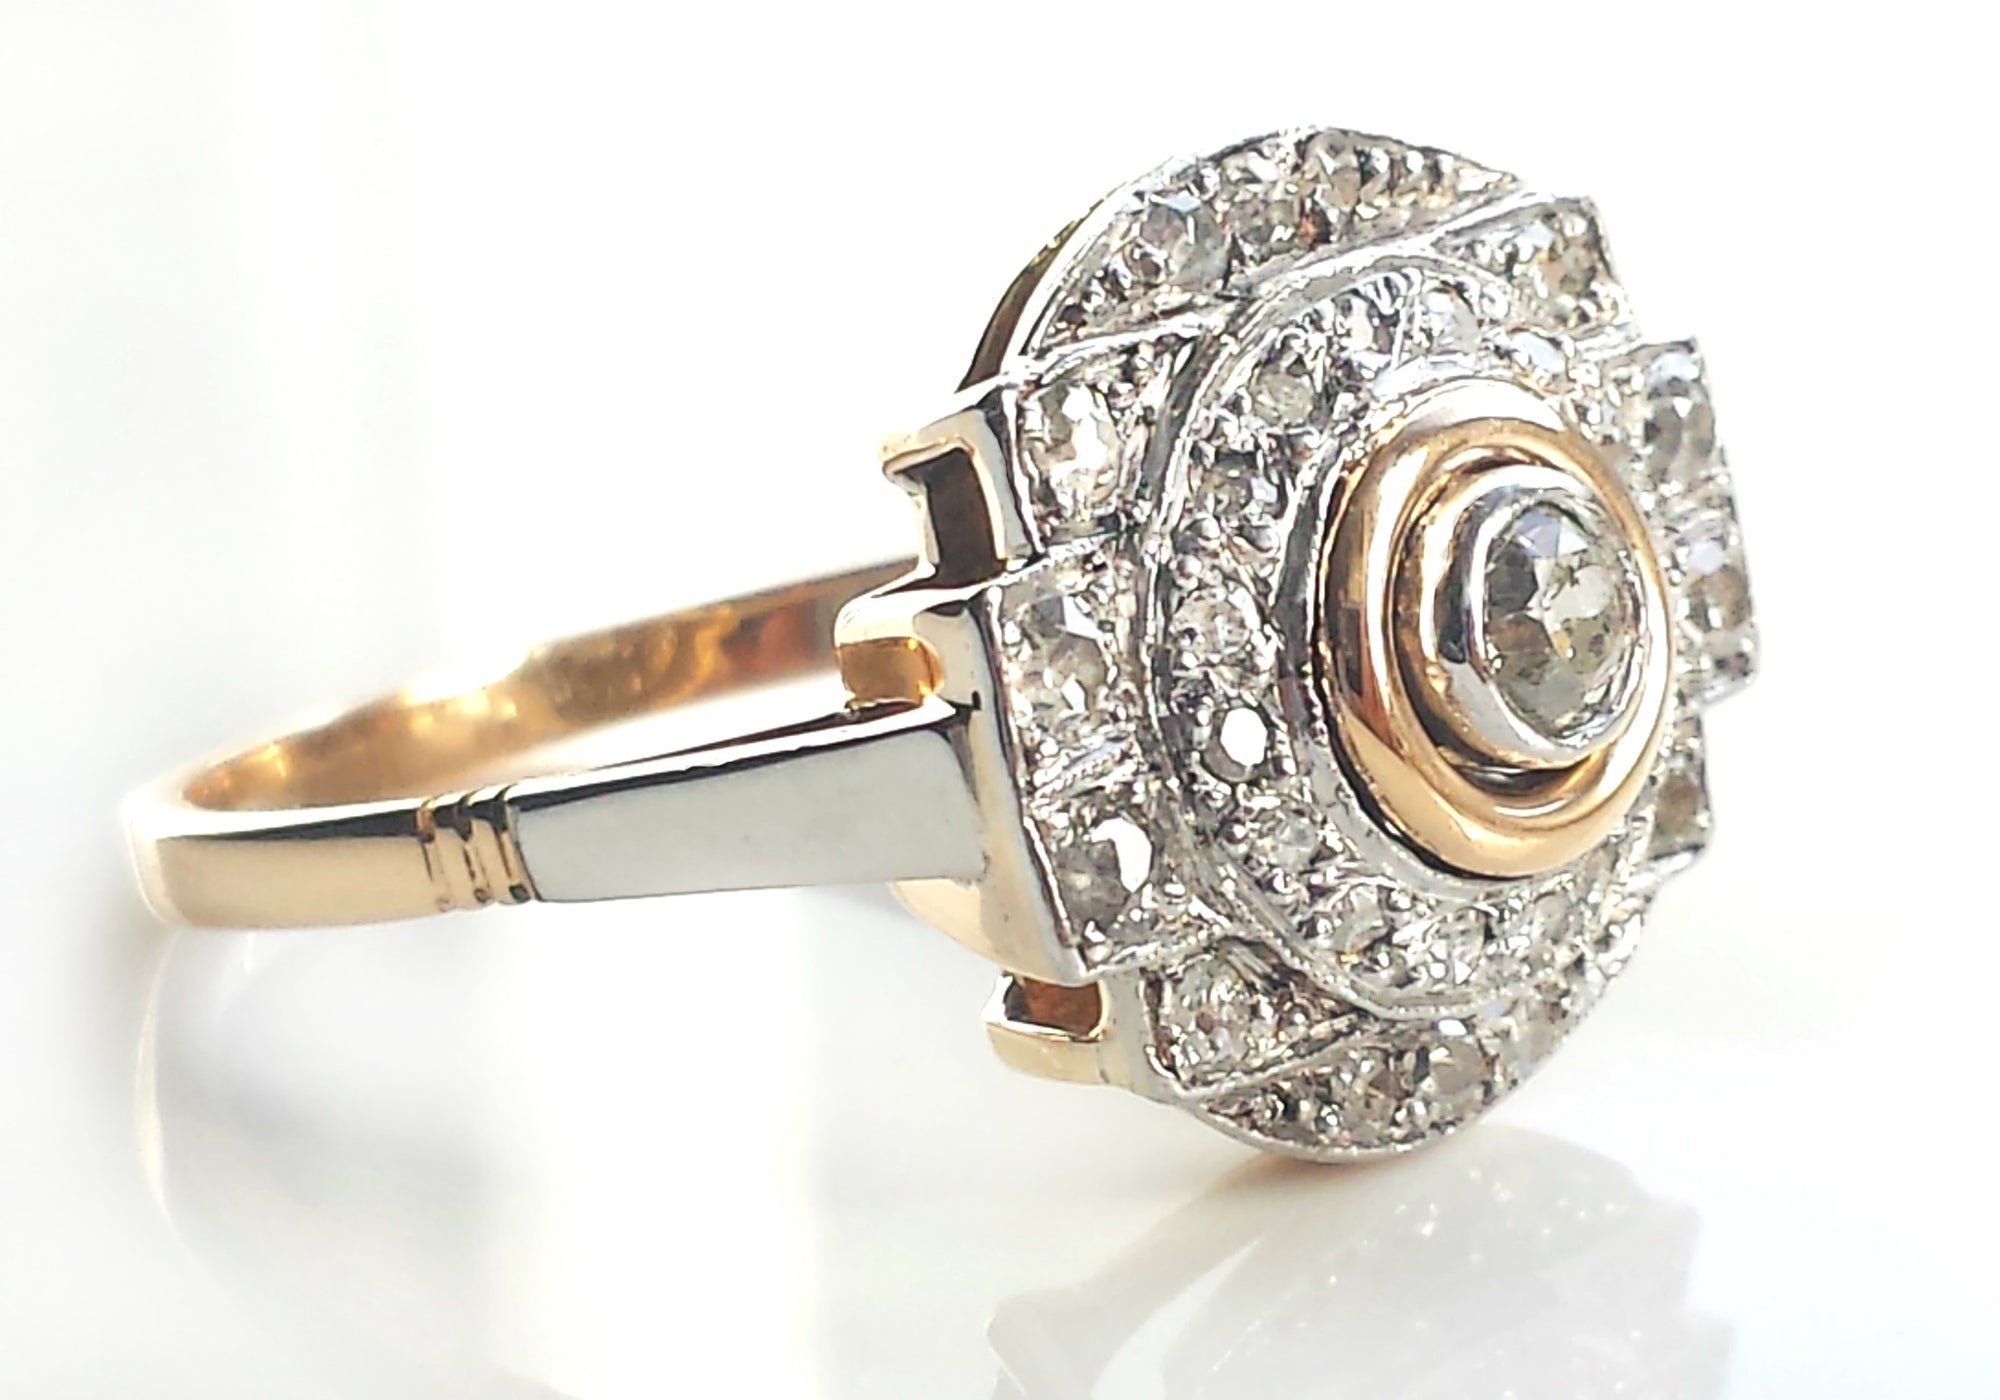 French Art Deco Shield 1.36tcw Diamond Engagement Ring in Platinum & 18k Yellow Gold